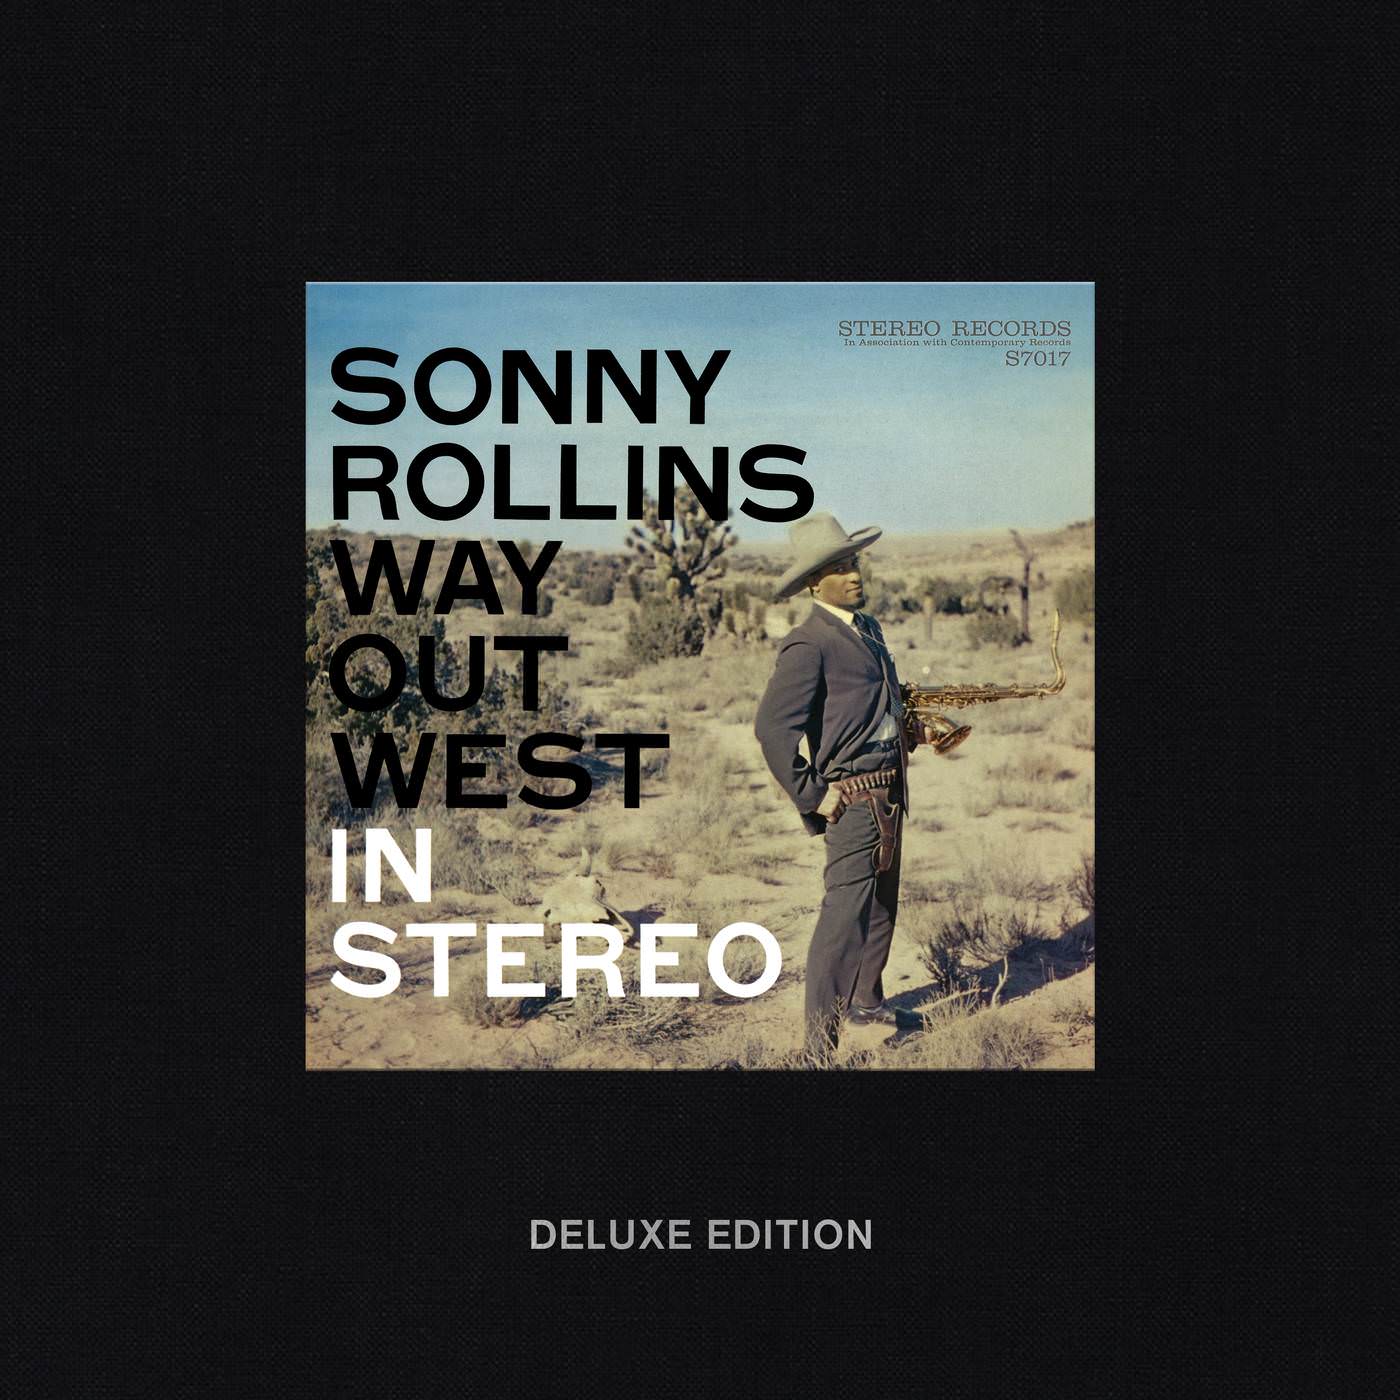 Sonny Rollins – Way Out West (Deluxe Edition) (1957/2018) [Official Digital Download 24bit/192kHz]